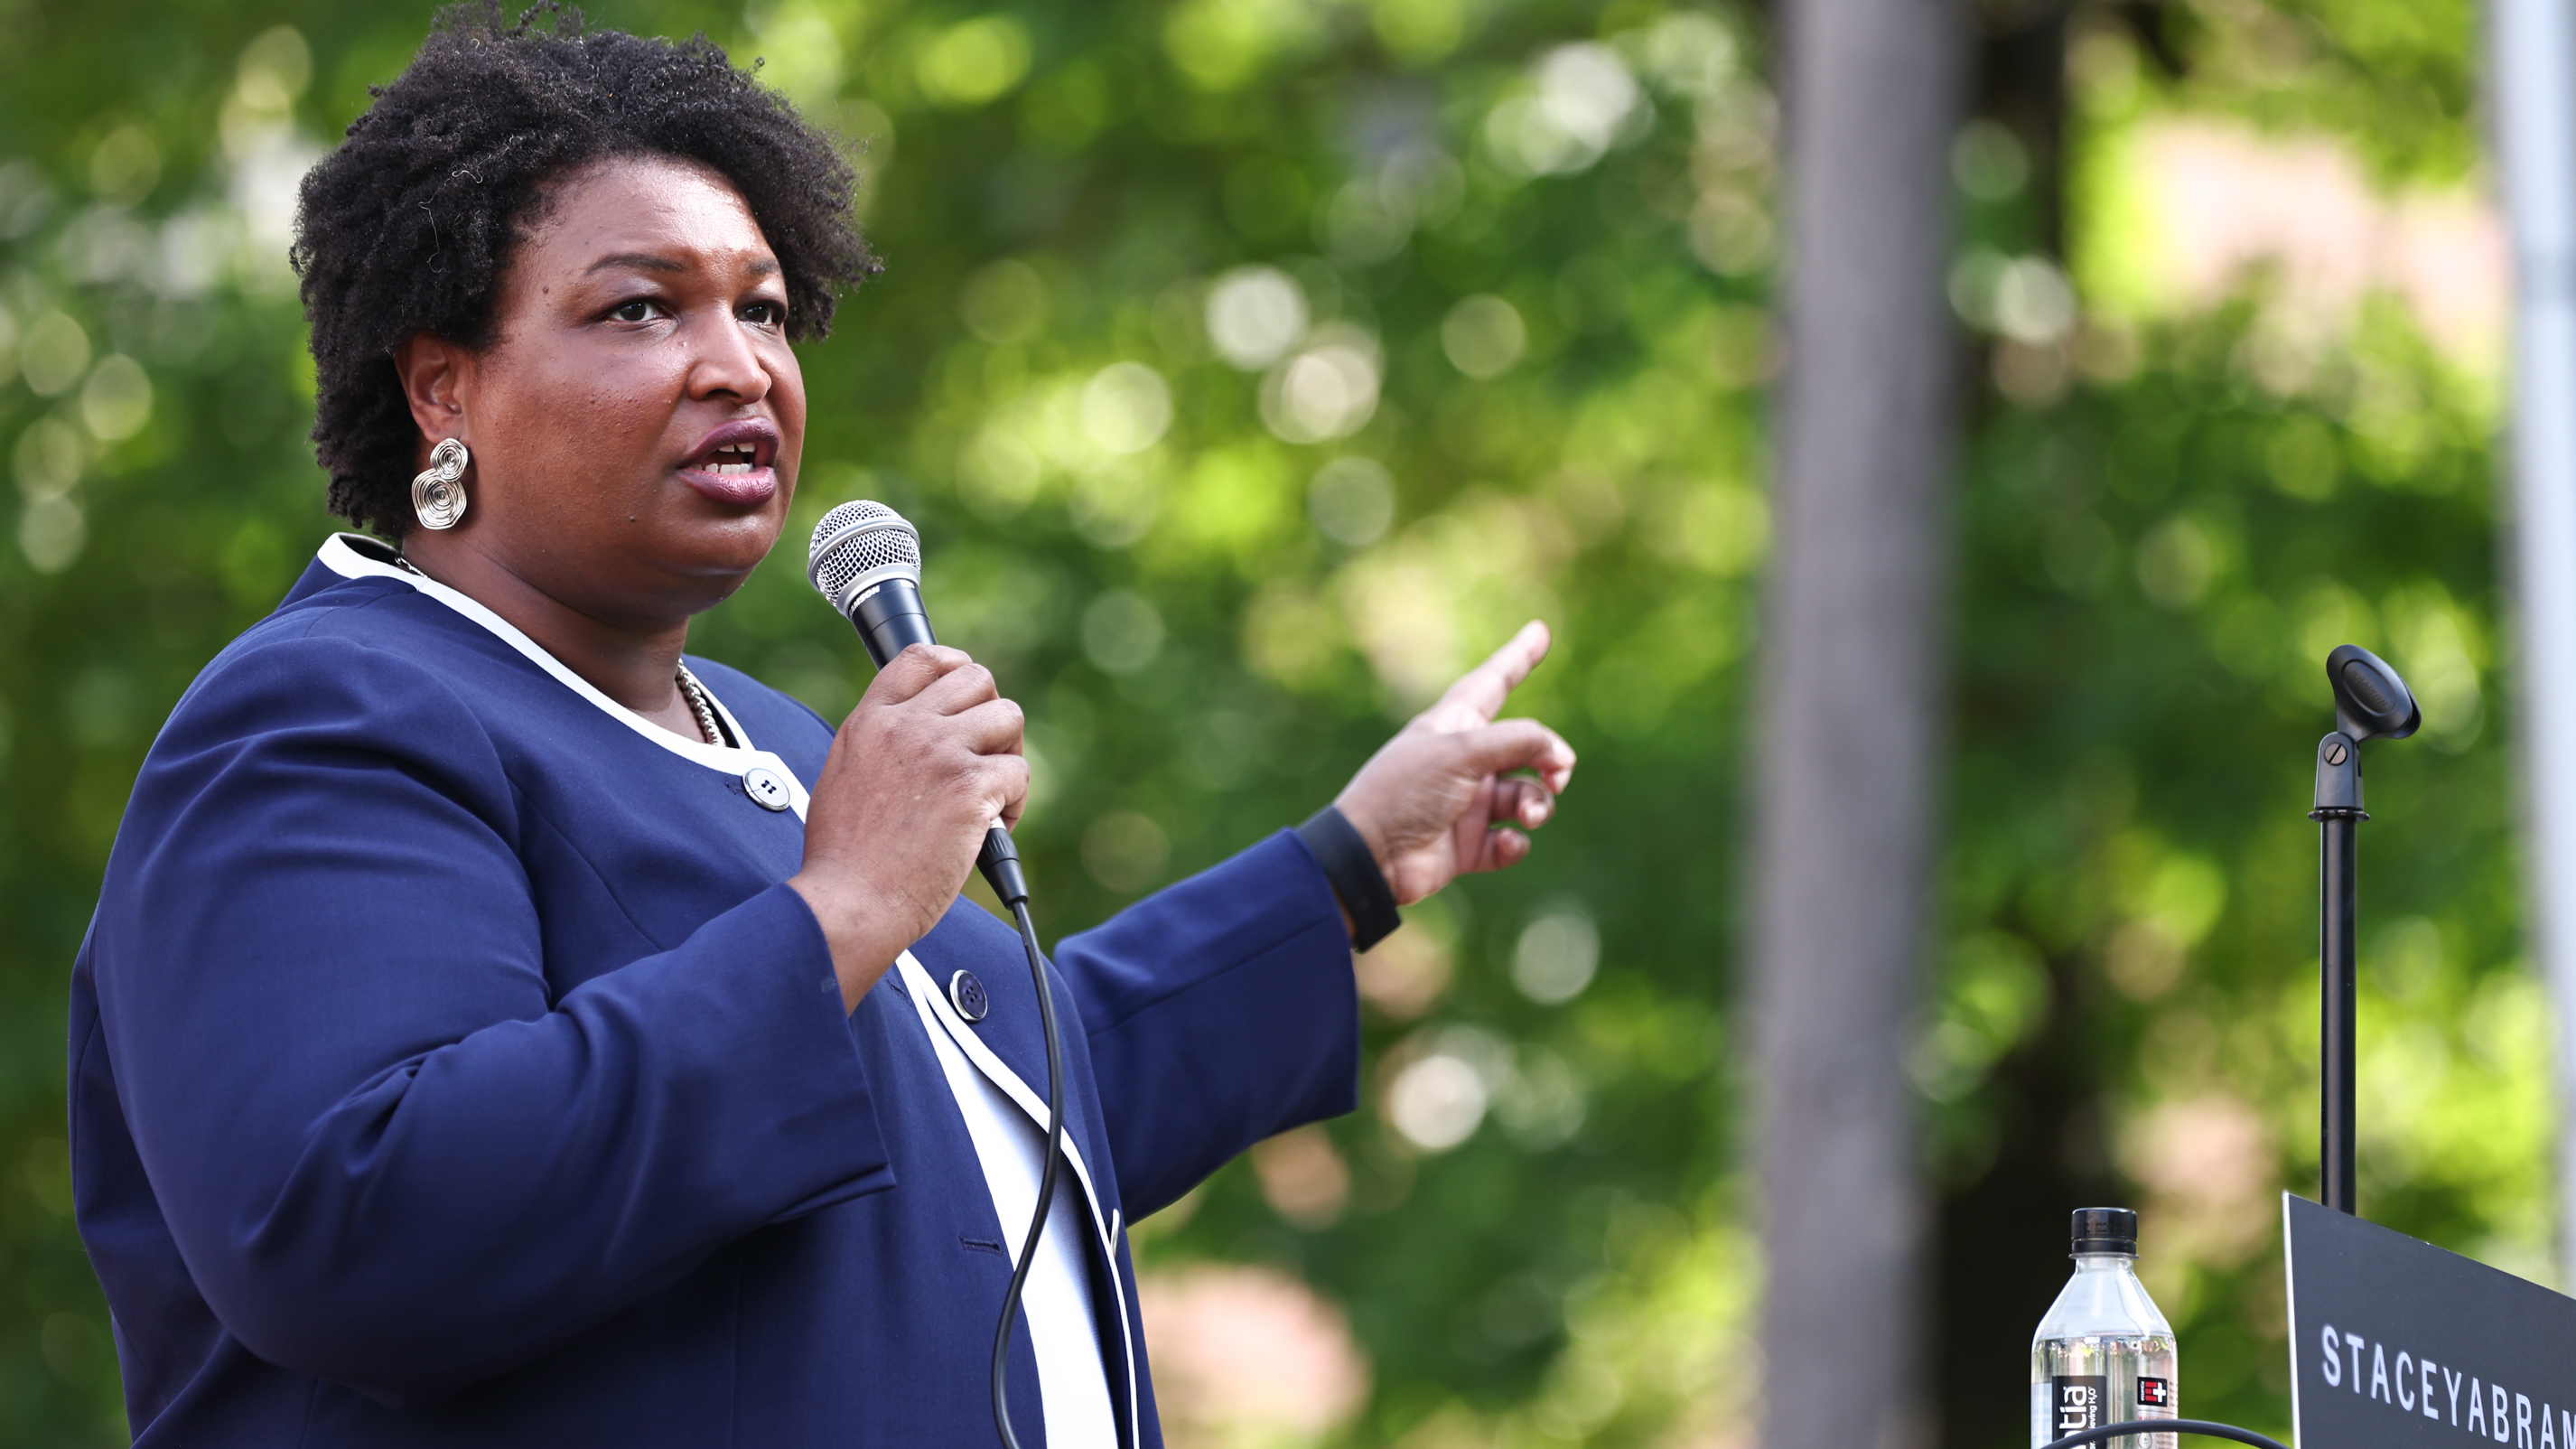 Stacey Abrams speaks during a campaign event in Reynolds, Georgia on June 4th. 